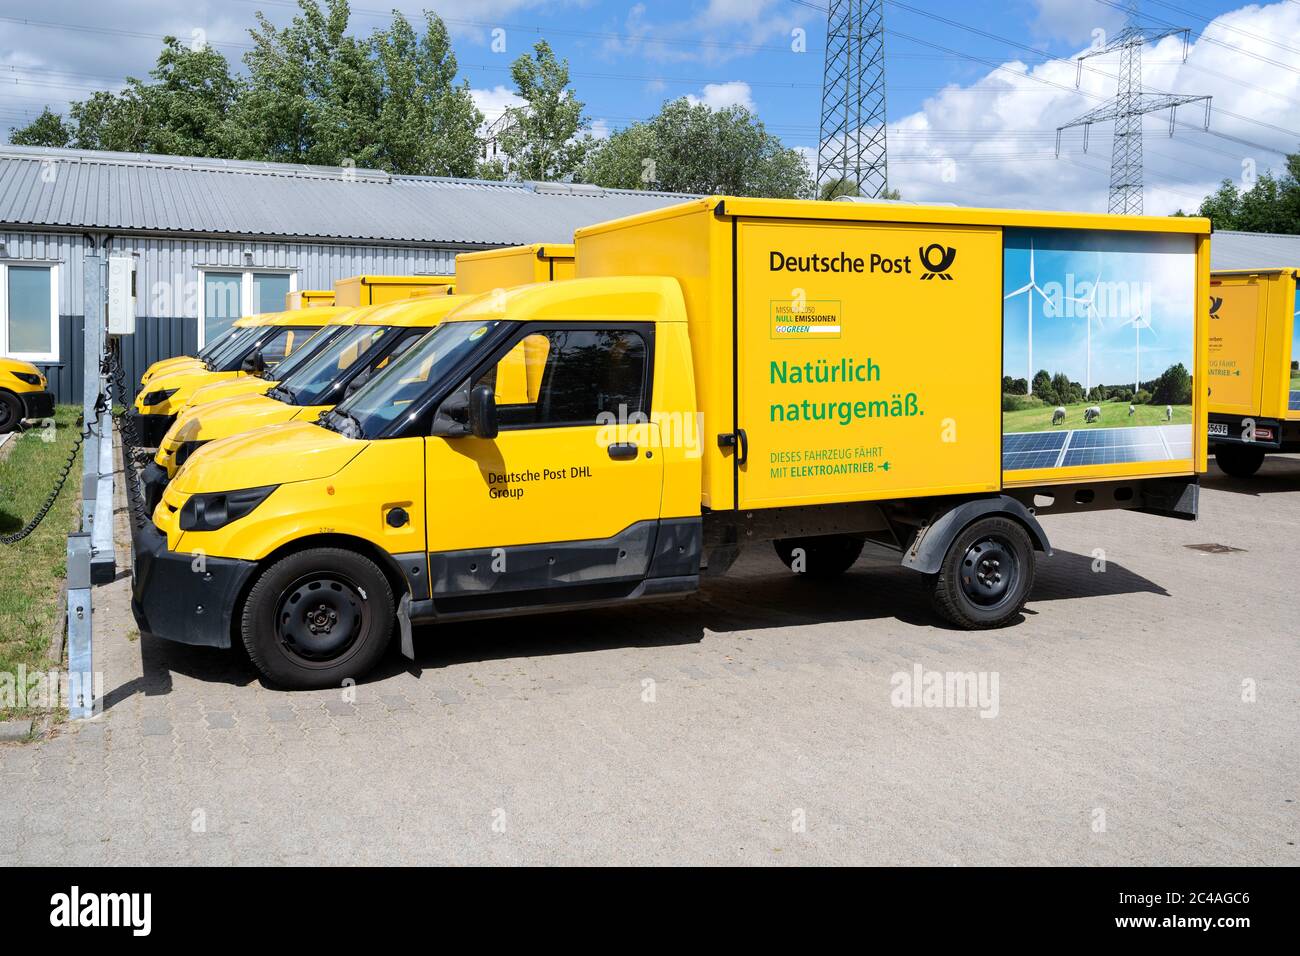 StreetScooter Work of Deutsche Post DHL Stock Photo - Alamy